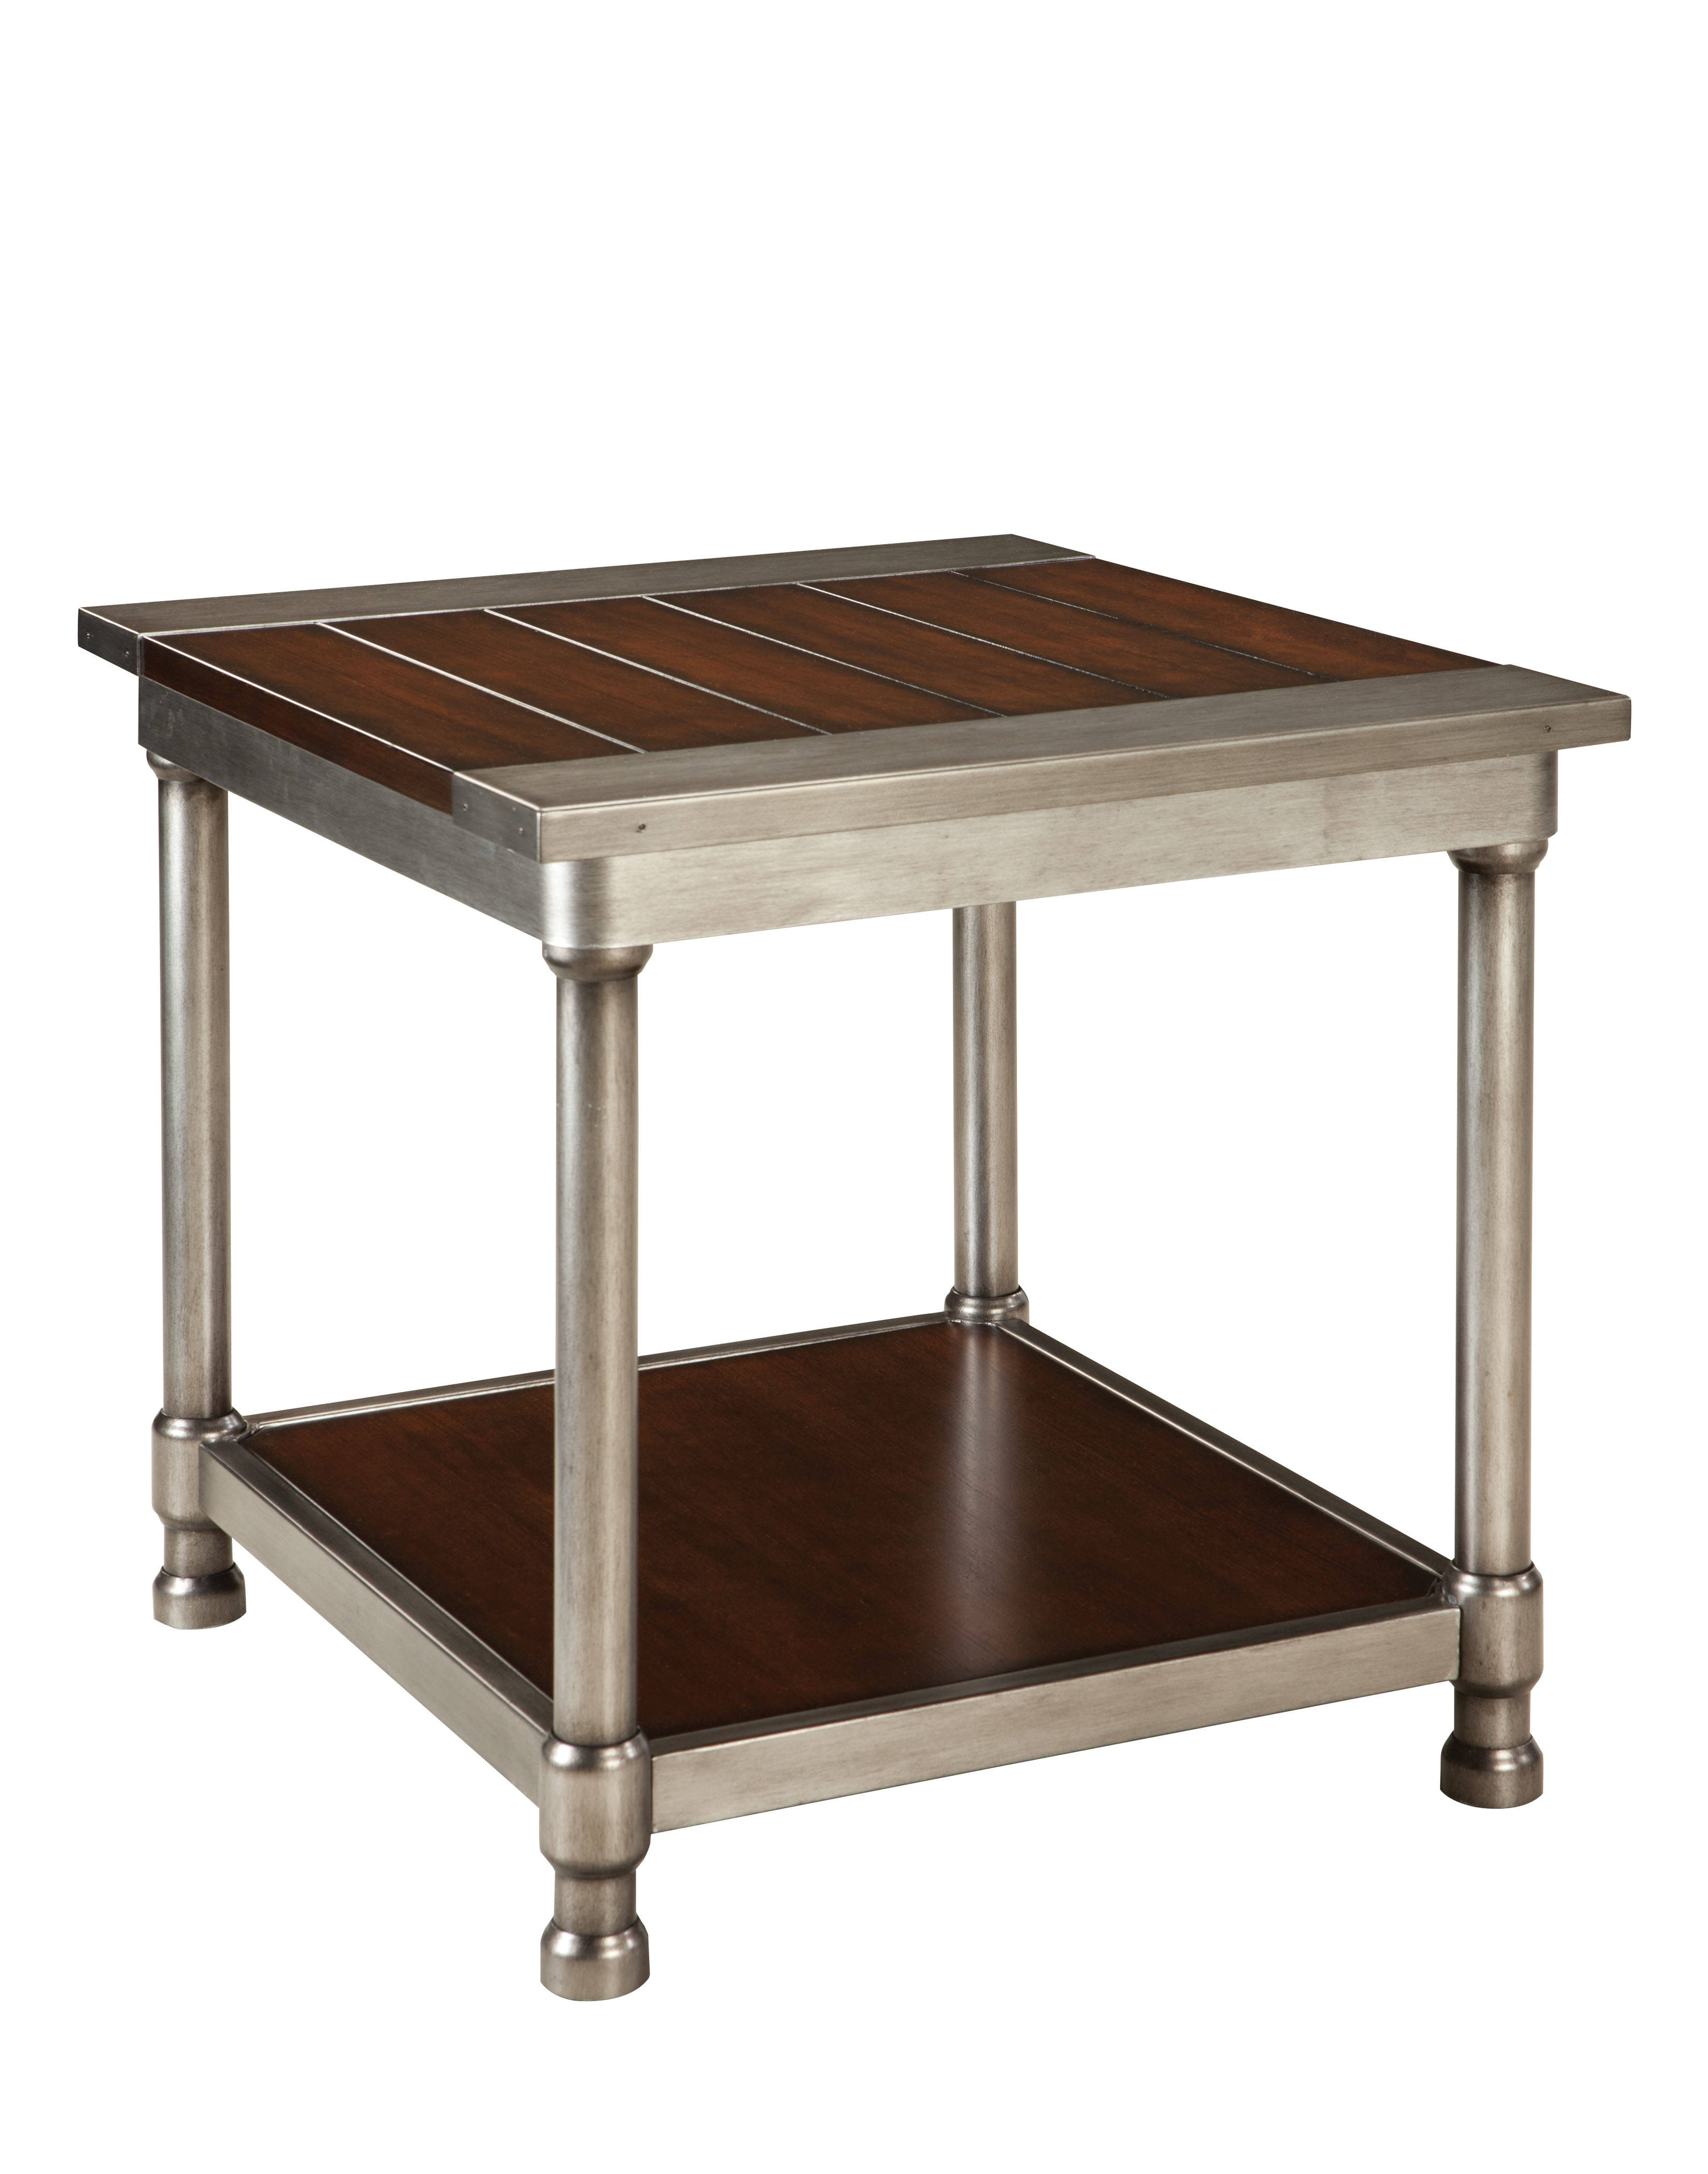 standard furniture hudson cherry end table the classy home std tables click enlarge glass top dining stickley atlanta white coffee with diy pallet sofa pipe stylish wooden plastic